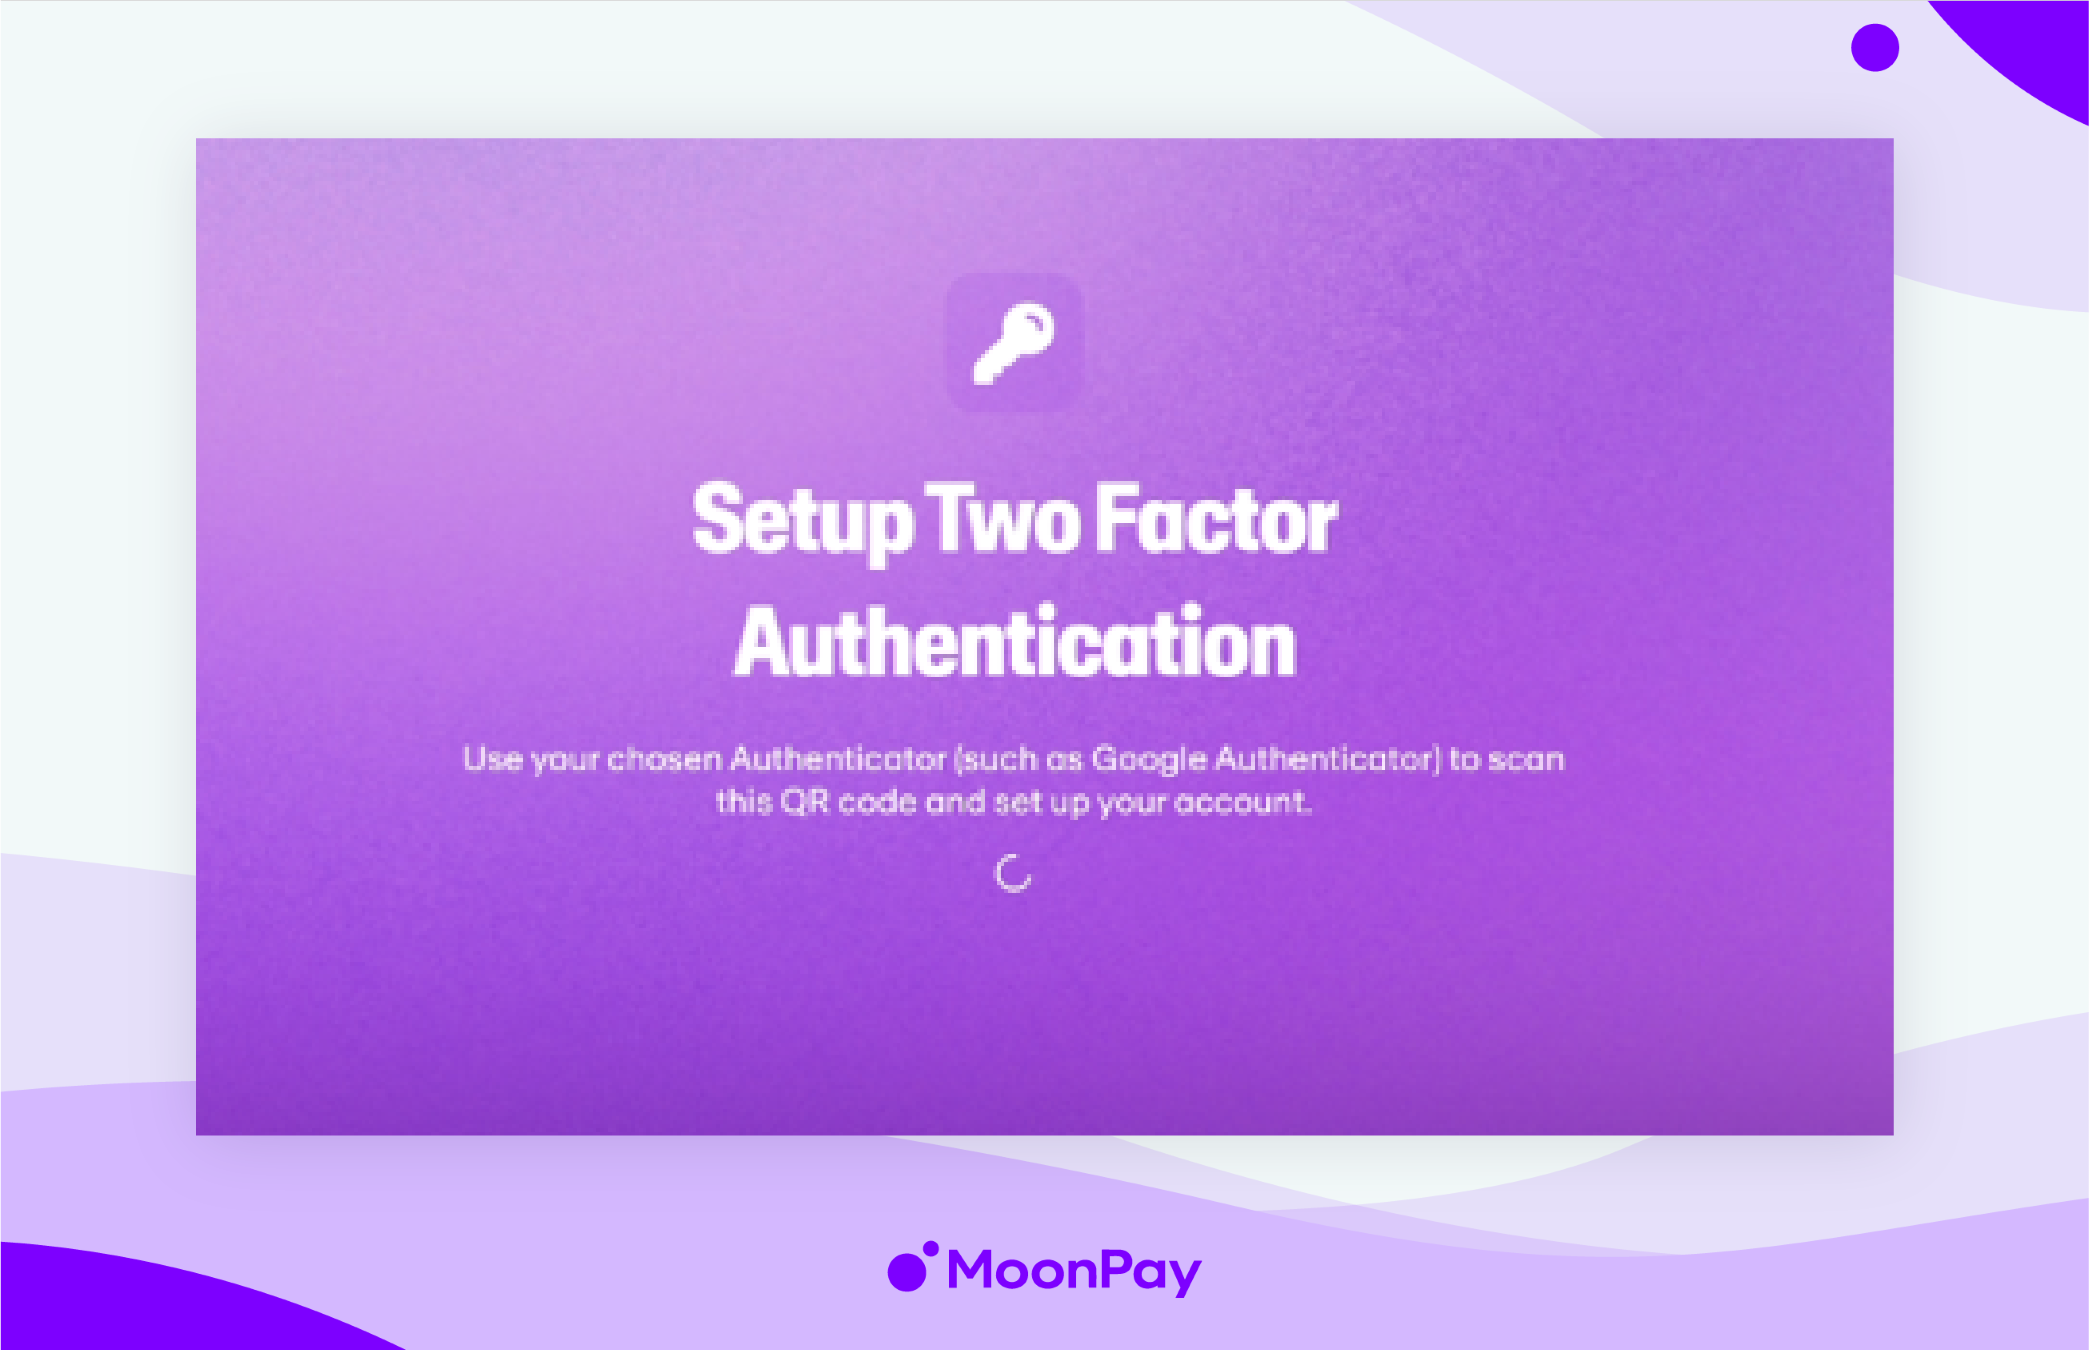 MoonPay's window shows the Setup of two-factor authentication.